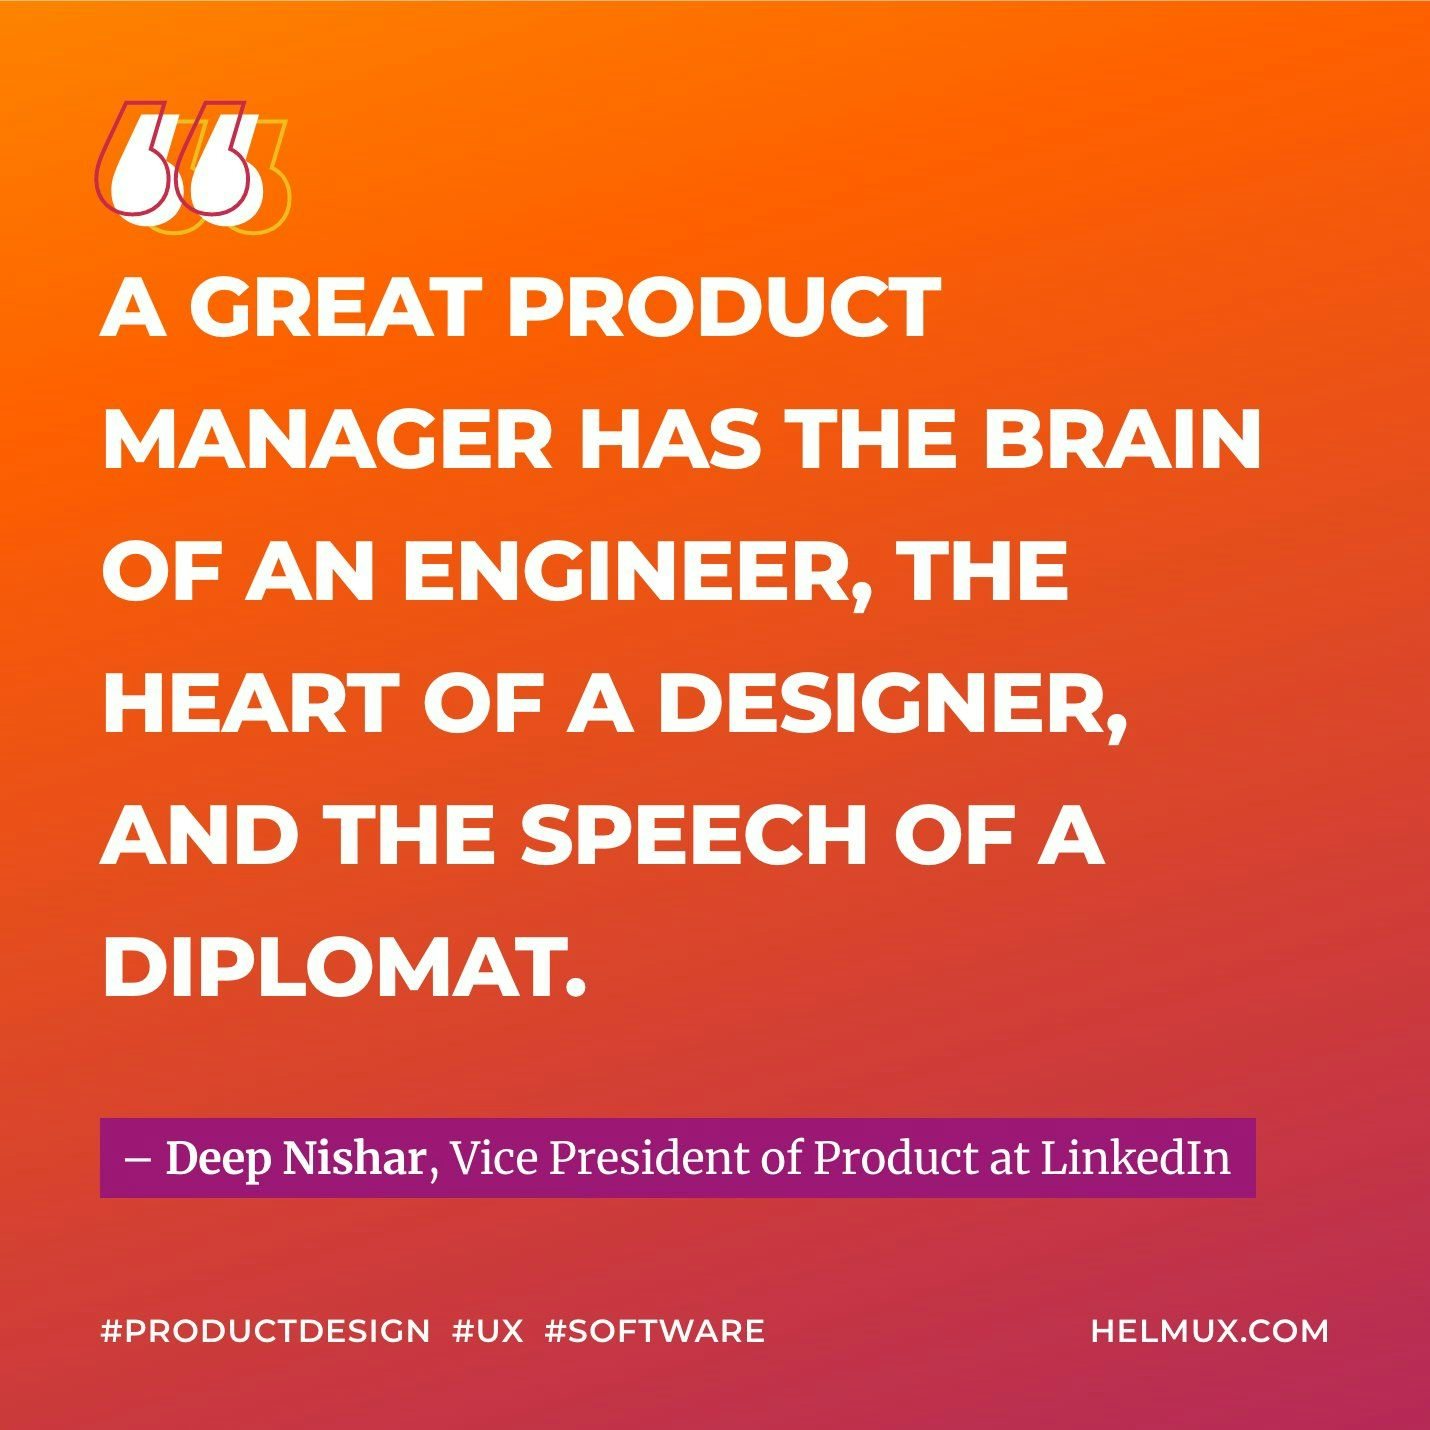 A great product manager has the brain of an engineer, the heart of a designer, and the speech of a diplomat - Deep Nishar, VP of Product at LinkedIn